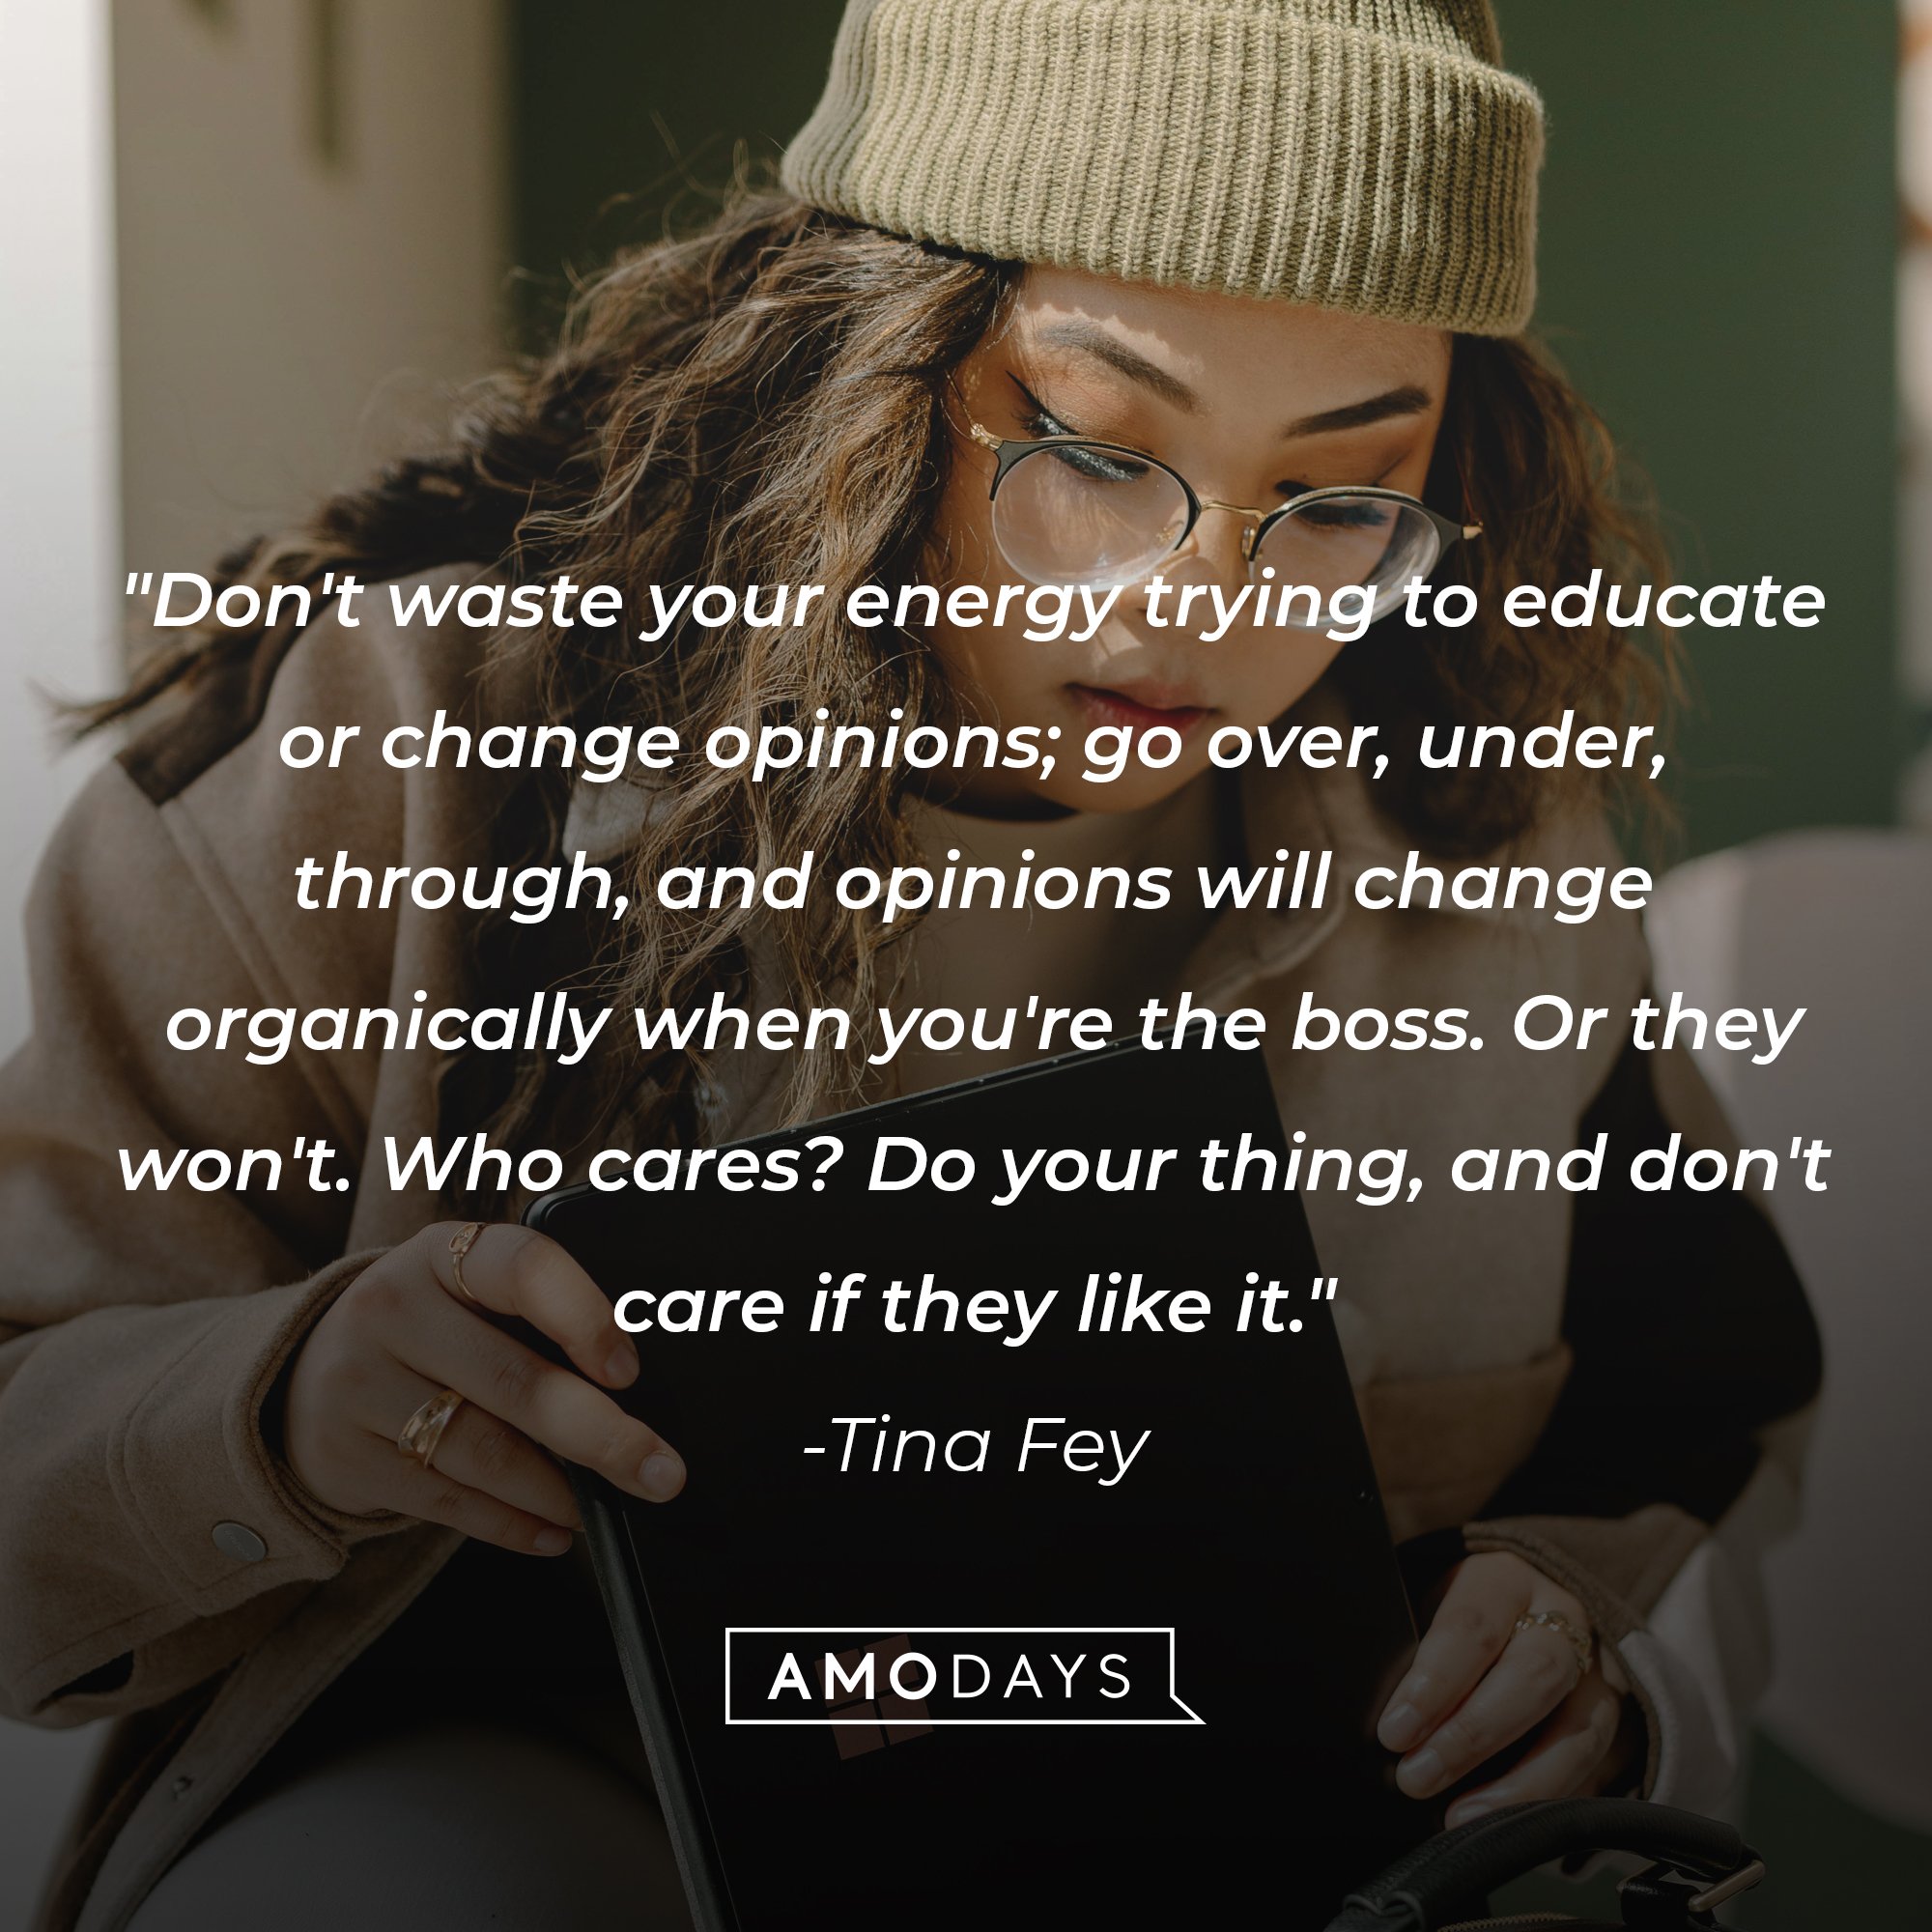 Tina Fey’s quote: "Don't waste your energy trying to educate or change opinions; go over, under, through, and opinions will change organically when you're the boss. Or they won't. Who cares? Do your thing, and don't care if they like it."  | Image: AmoDays